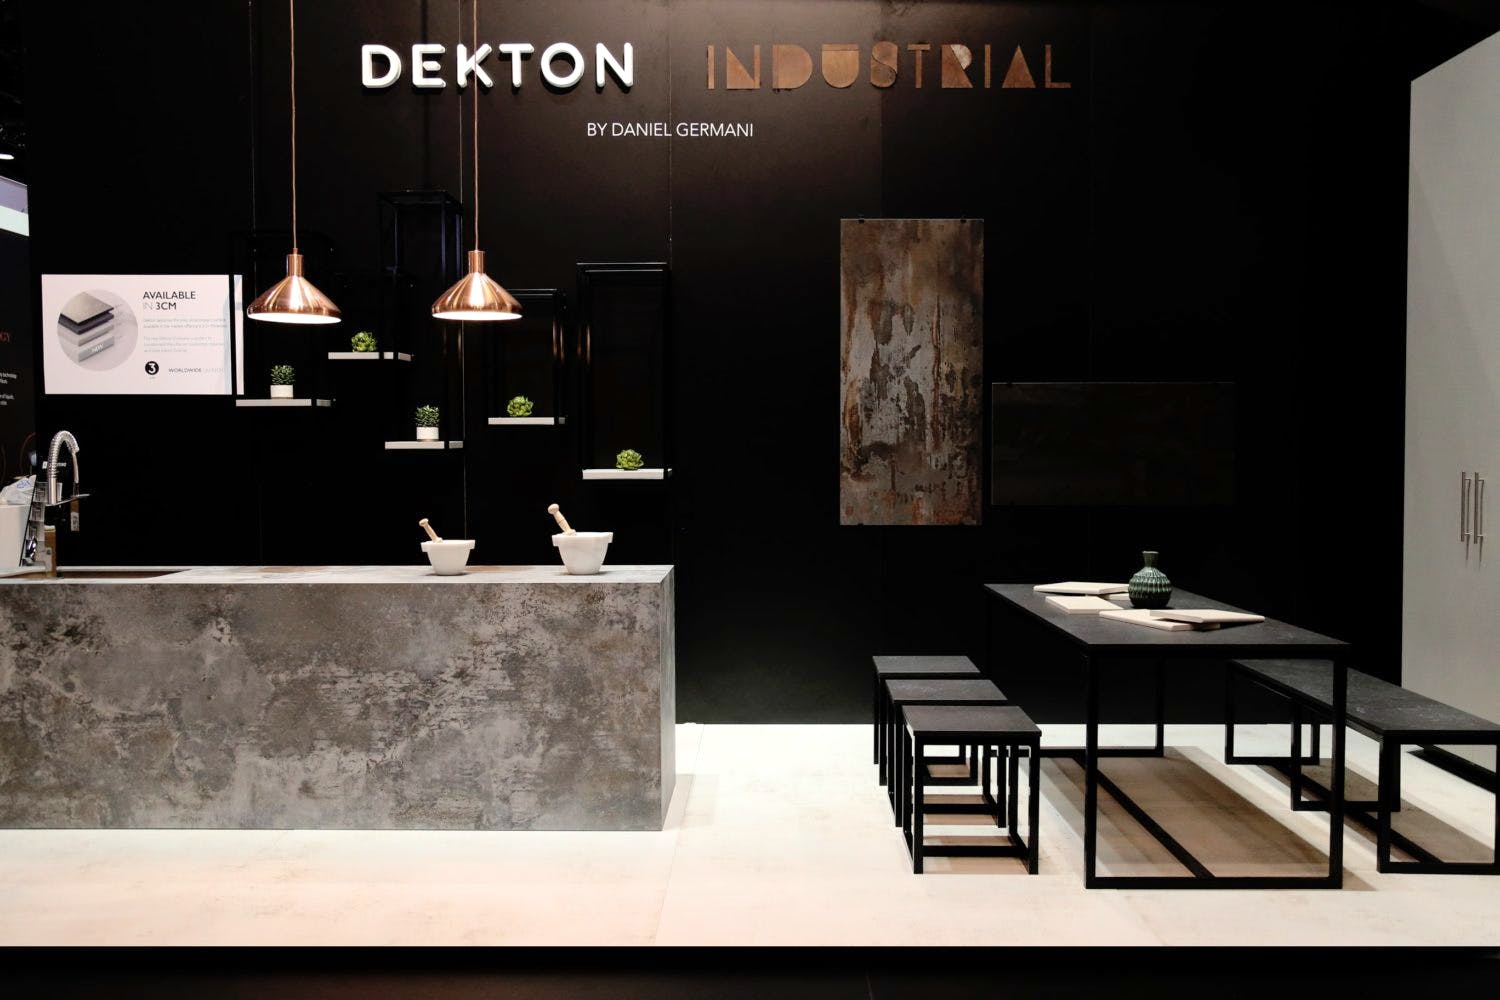 Image of Dekton Industrial Stand Cosentino KBIS 2018 lr 1500x1000 6 in Save the Date: Cosentino at Milan Design Week 2018 - Cosentino